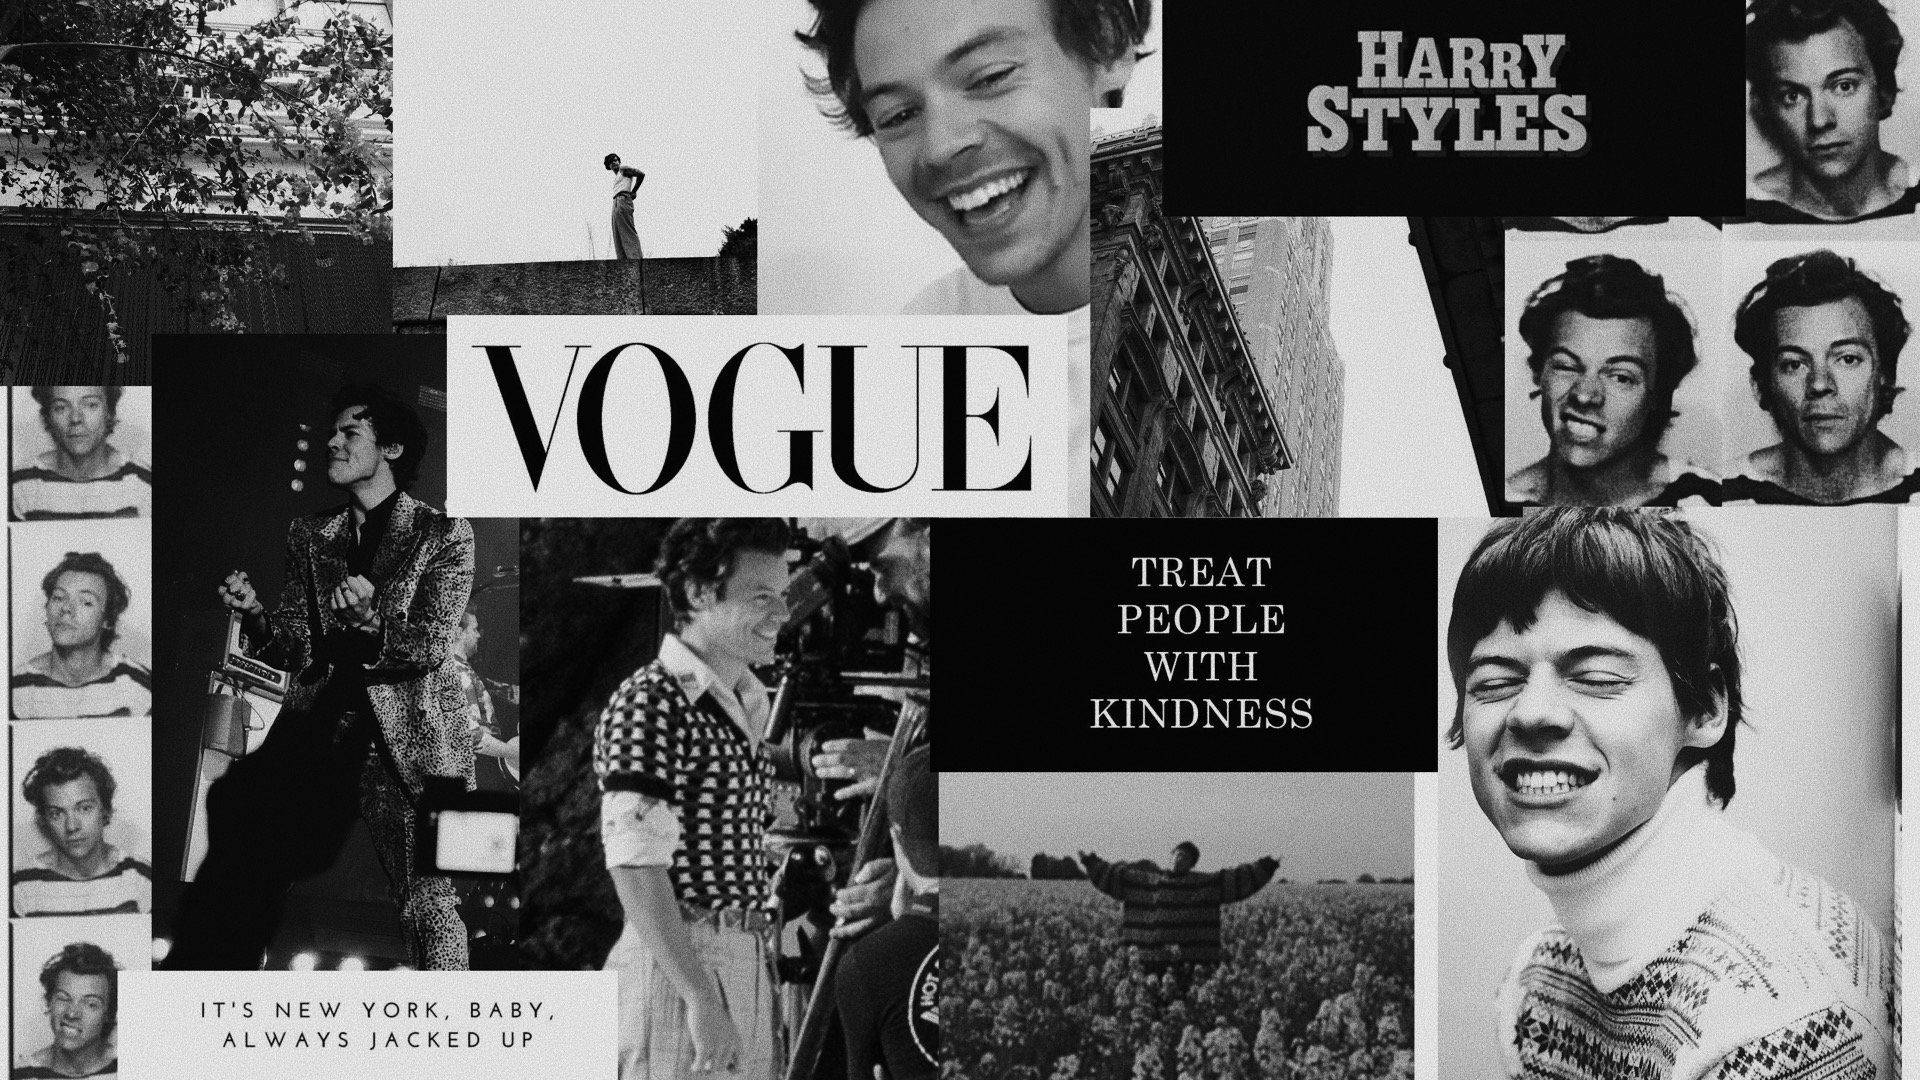 Harry Styles Vogue Collage Wallpaper